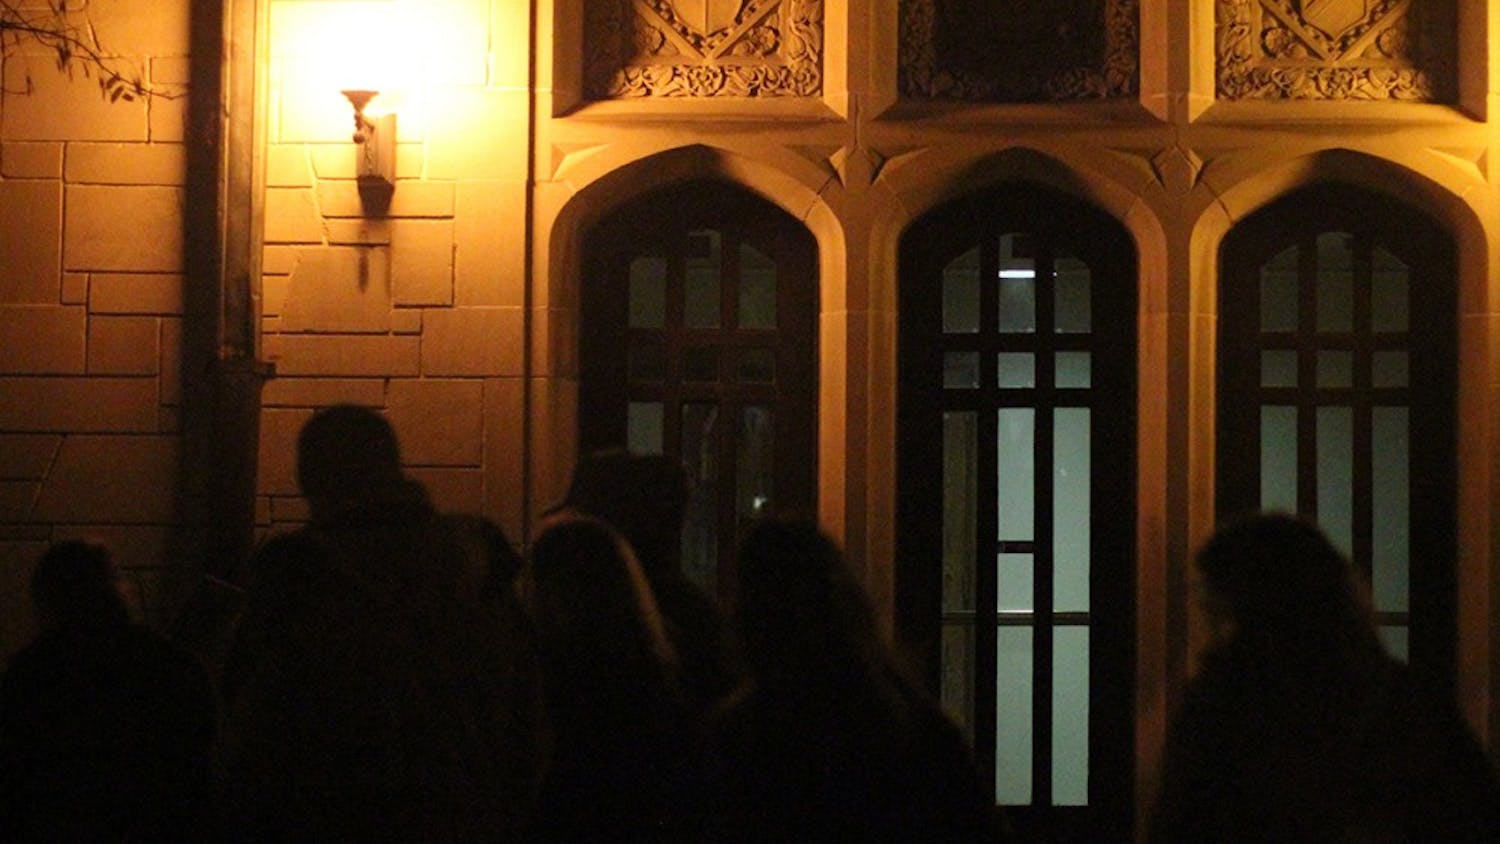 The ghost walk began at around 8 p.m. Tuesday night. About 50 people trekked around campus for the tour.